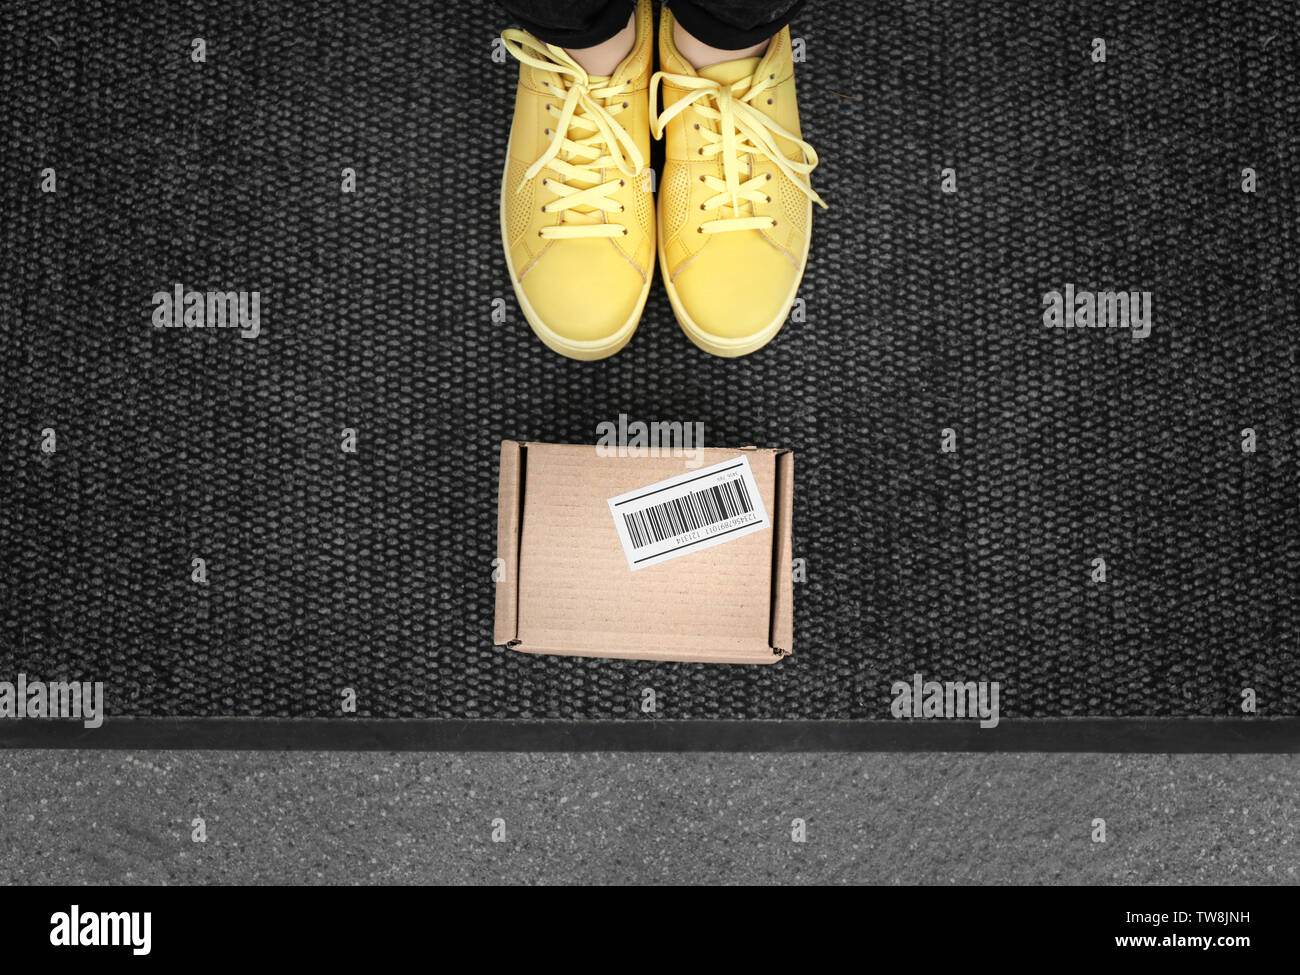 Woman standing near delivered parcel on doormat, closeup Stock Photo